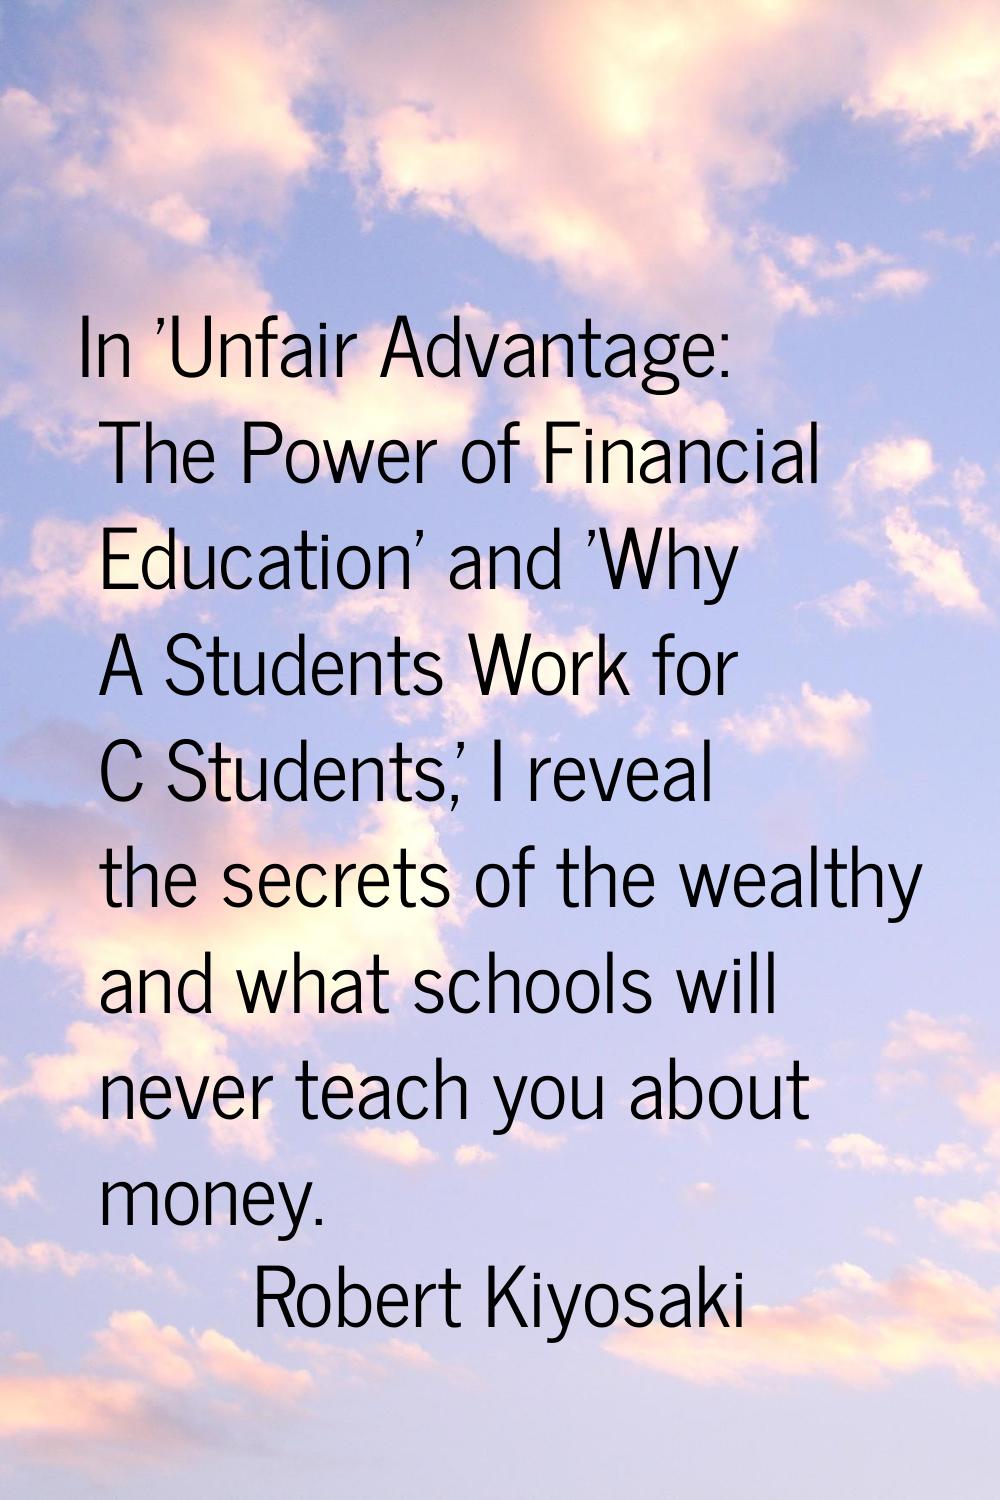 In 'Unfair Advantage: The Power of Financial Education' and 'Why A Students Work for C Students,' I